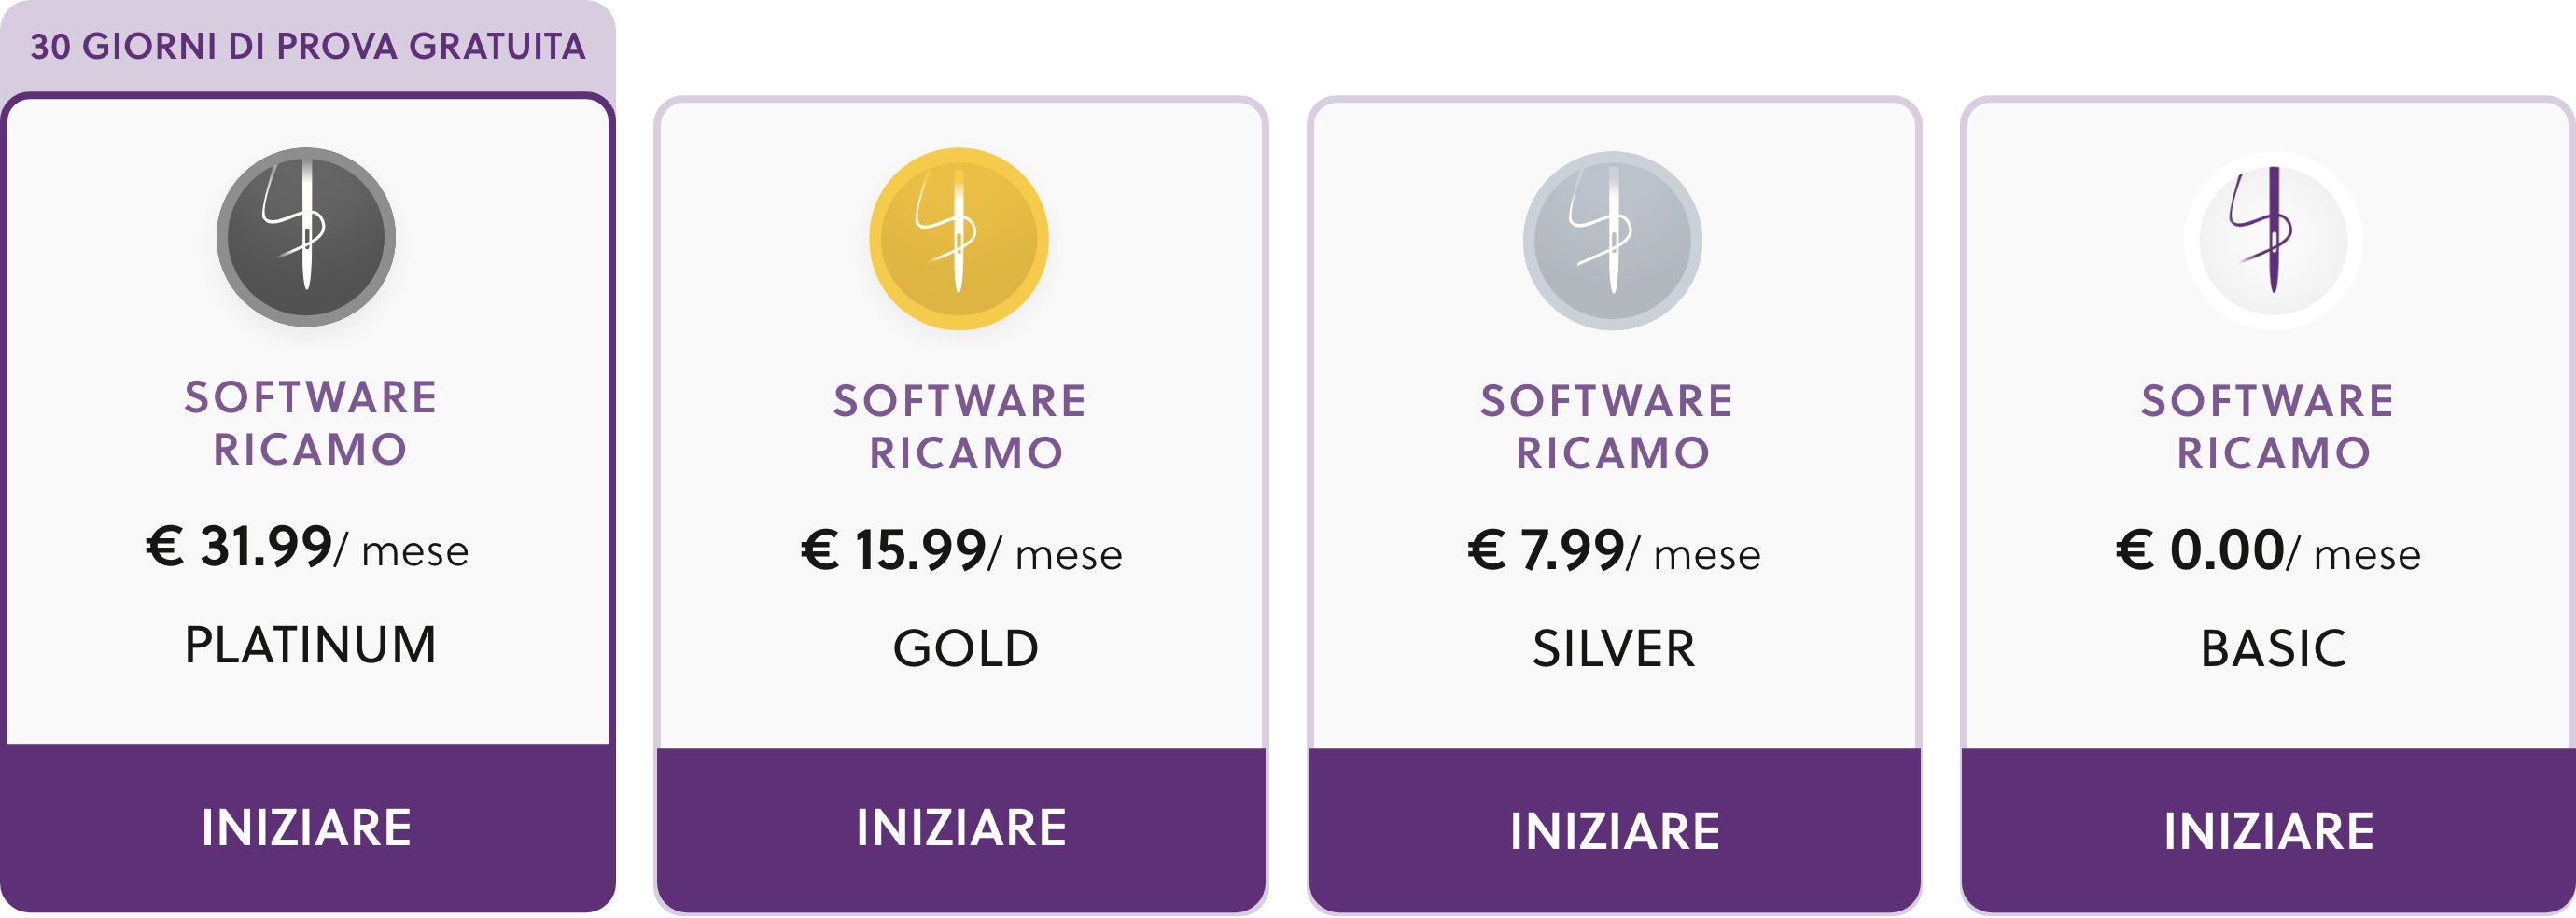 Pricing Cards ITALIAN.png